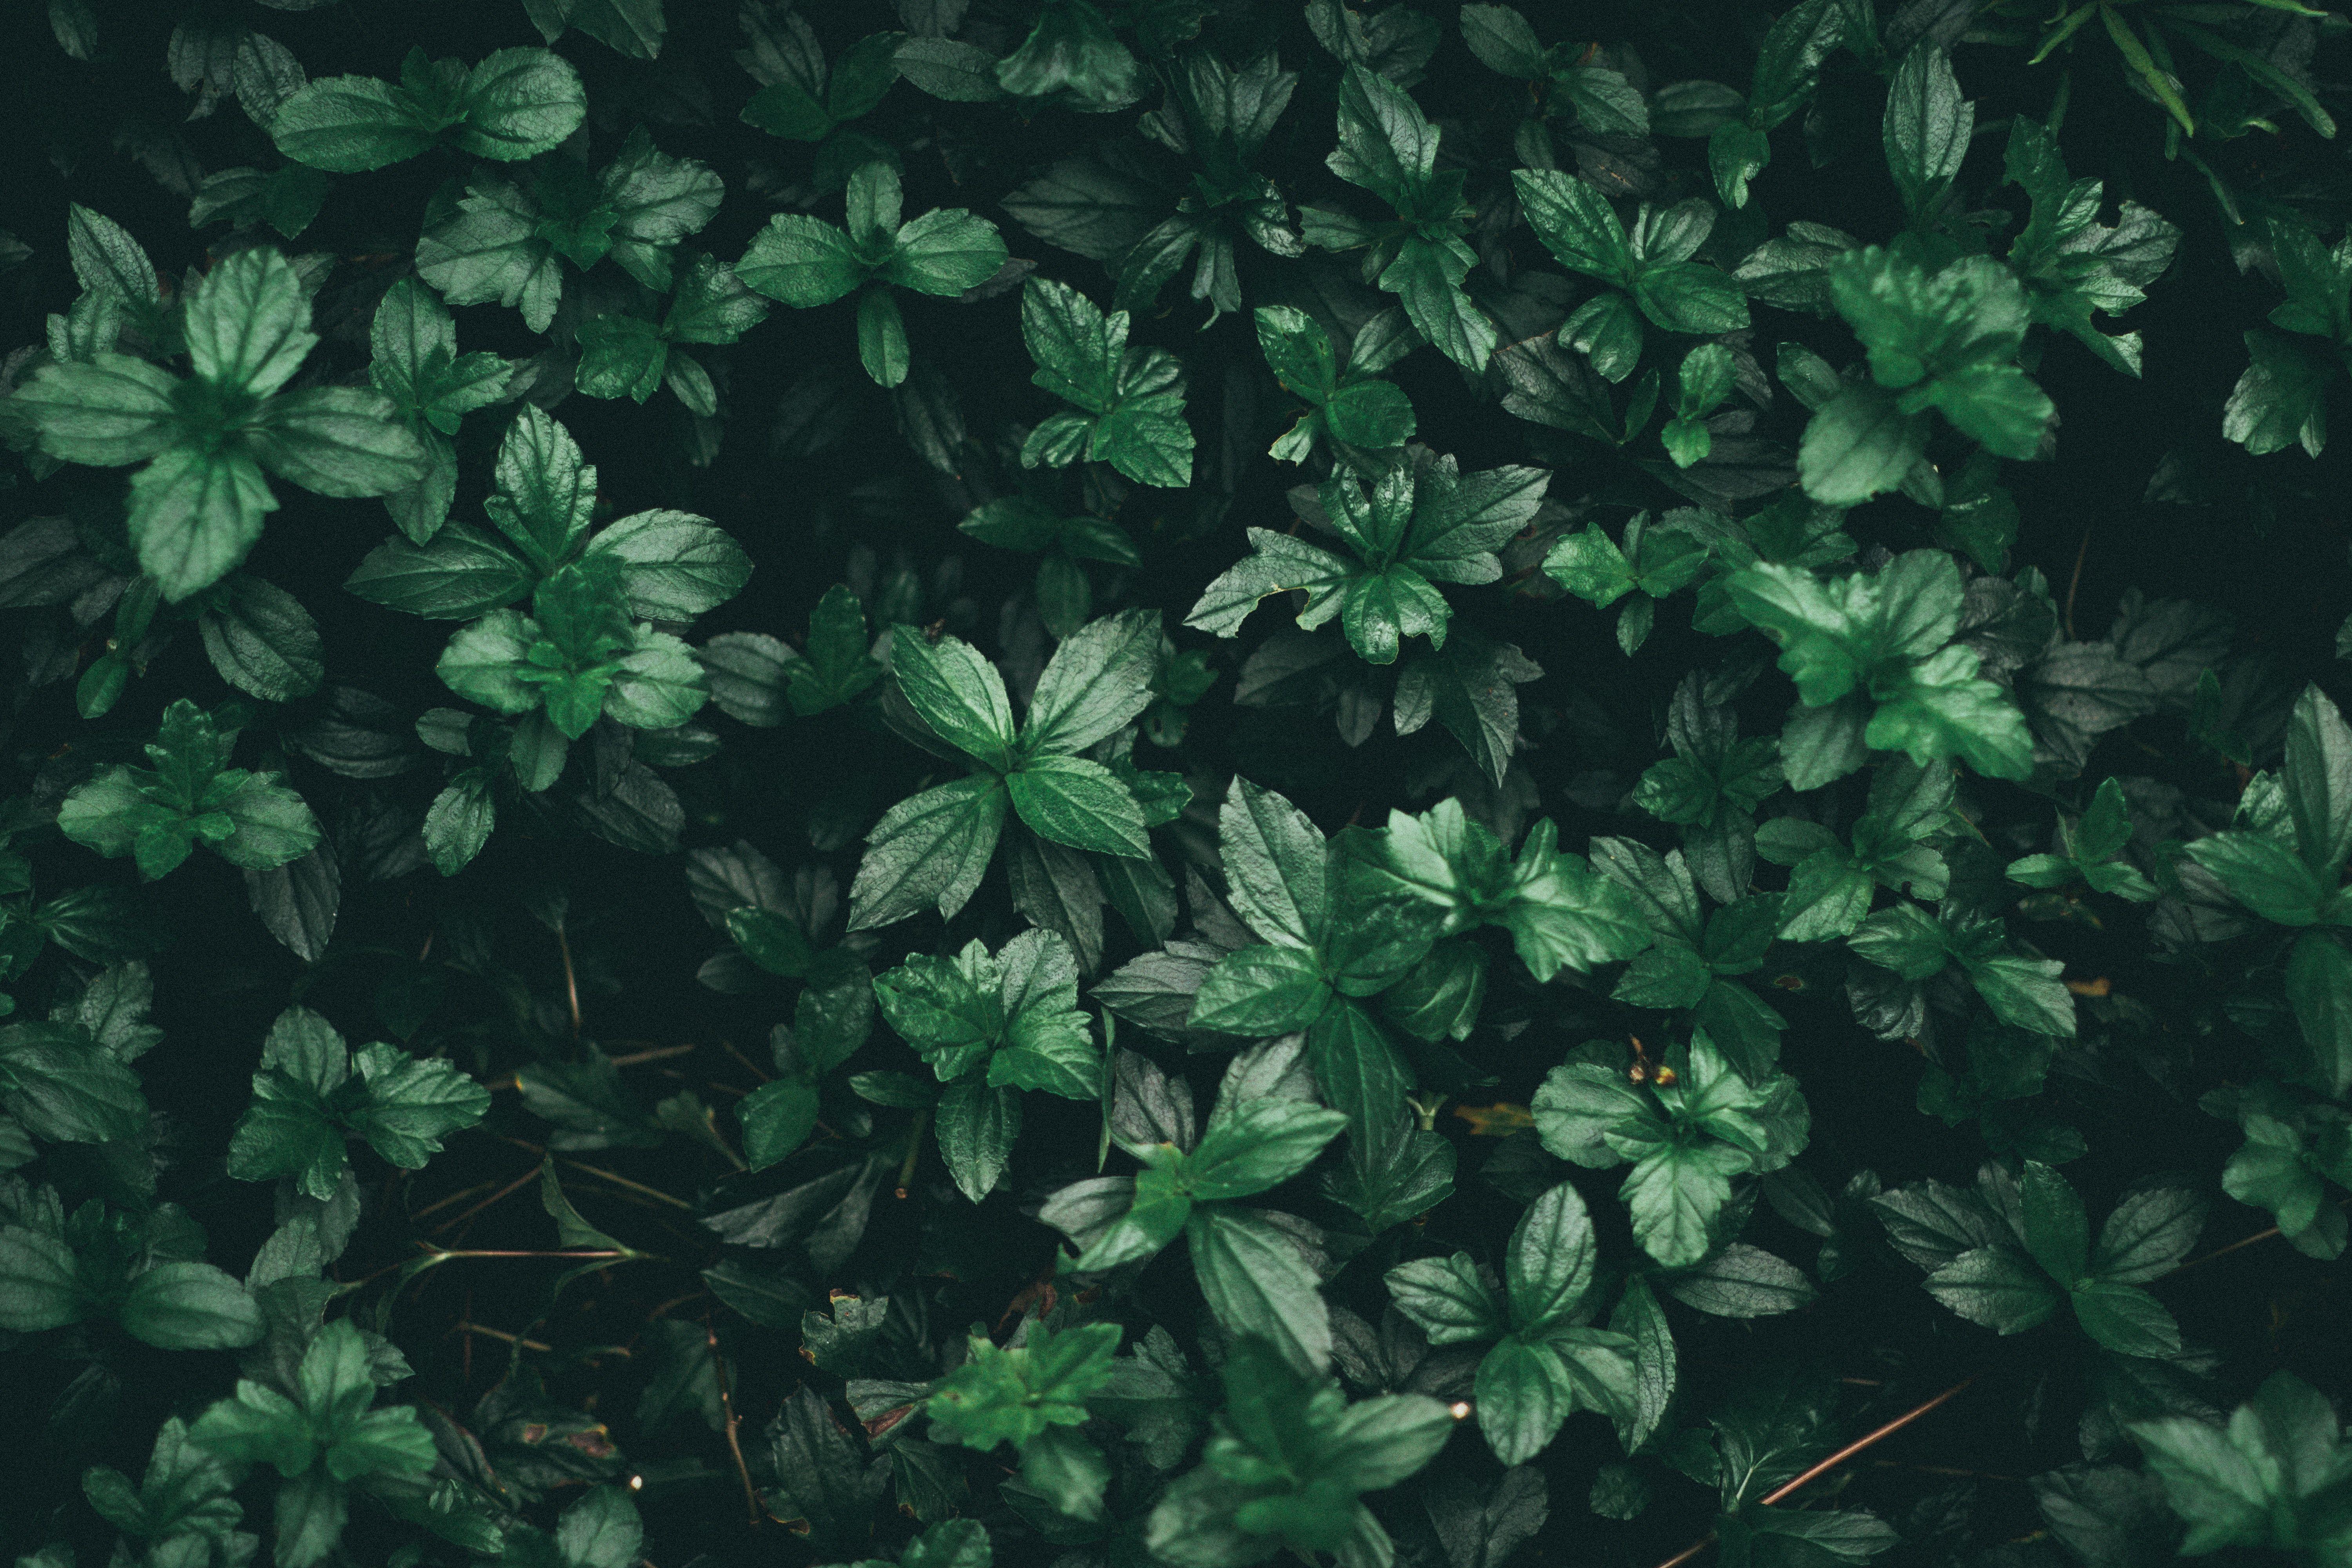 Aesthetic Sage Green Computer Backgrounds - Goimages User